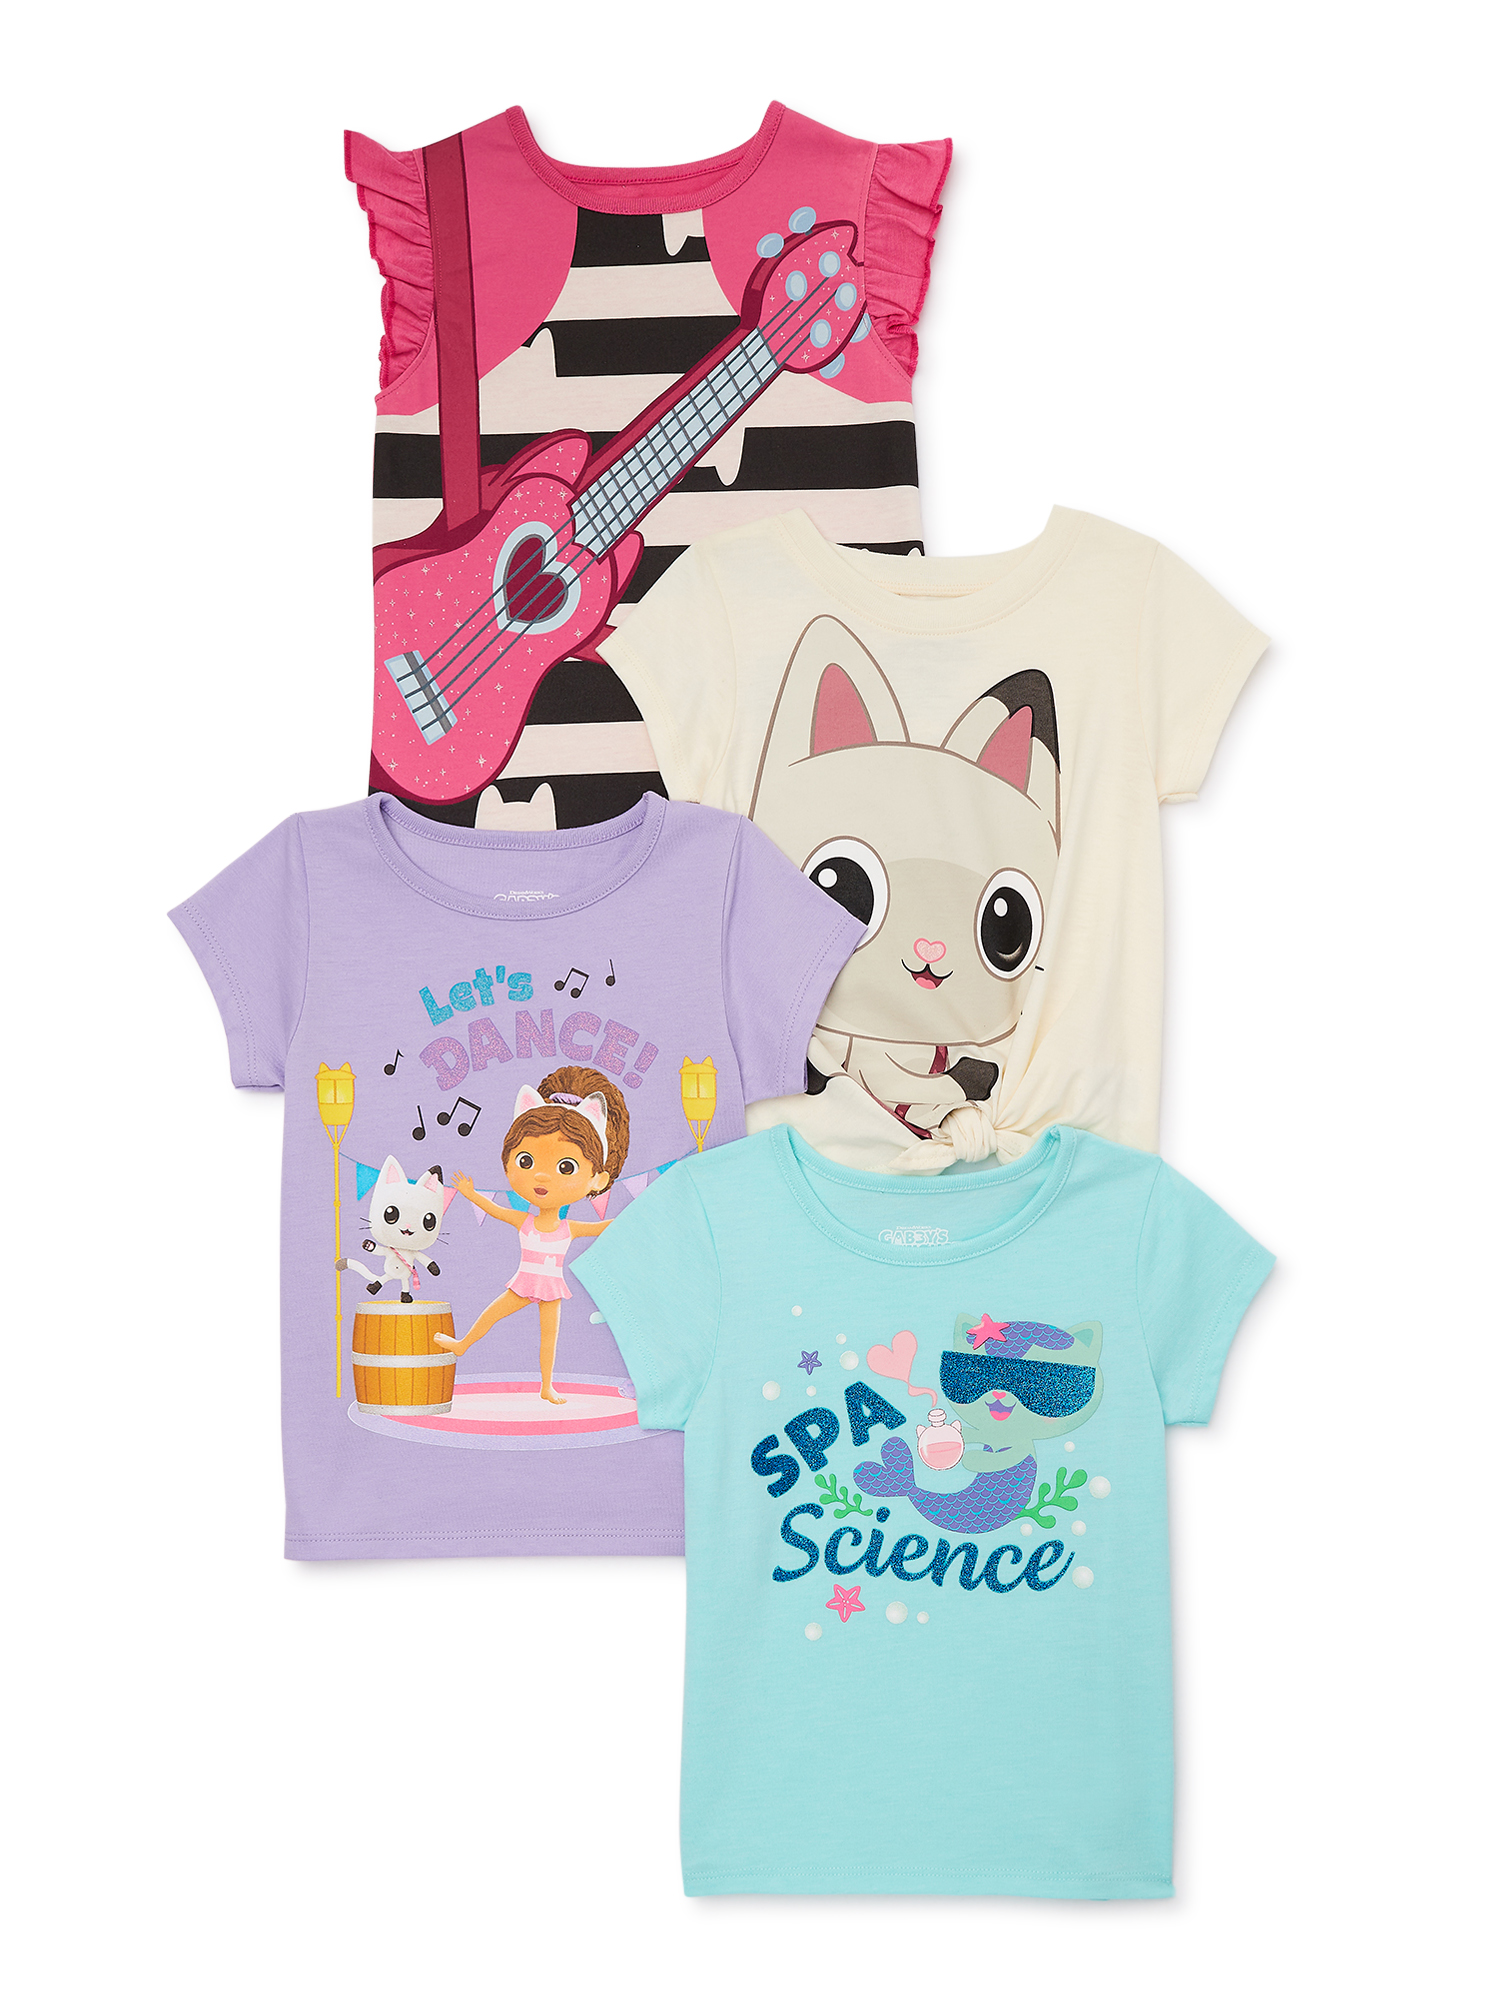 Gabby's Dollhouse Toddler Girl Graphic Print Fashion T-Shirts, 4-Pack, Sizes 2T-5T - image 1 of 9